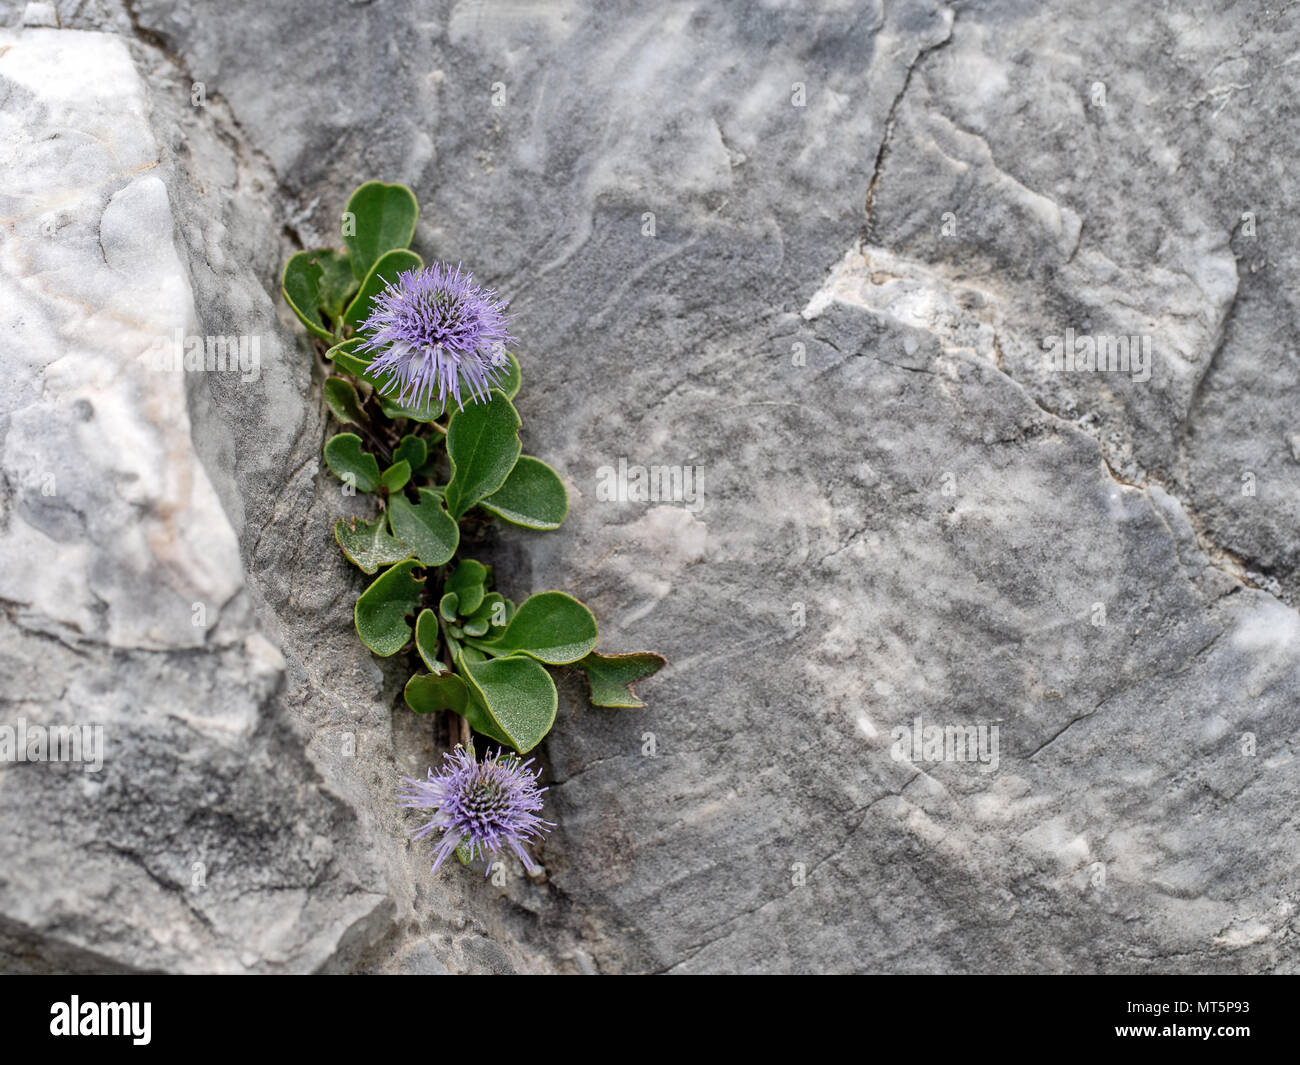 Globulari incanescens, growing wild on rocky crags in the Apuan Alps, Italy. Stock Photo